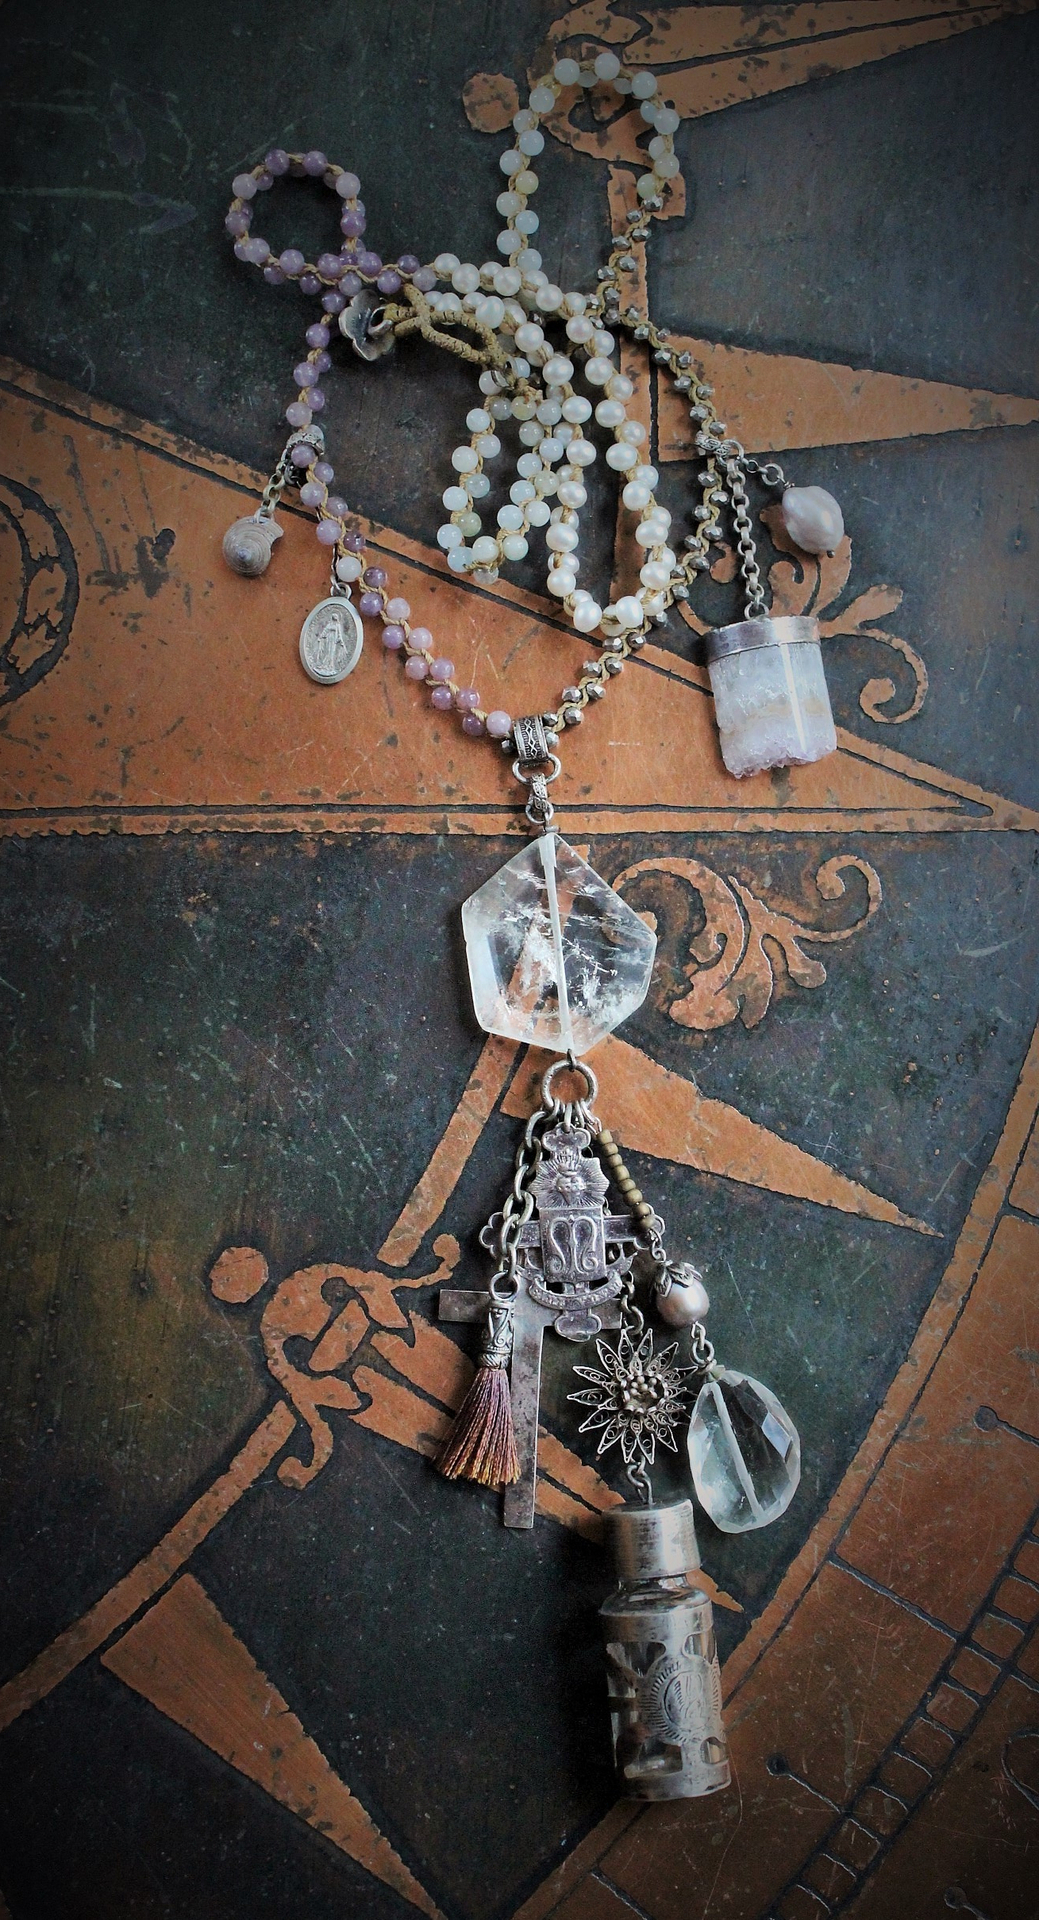 SOLD to C Payment 2  The Pearls in the Soul Amulet Necklace w/Antique Sterling and Glass Perfume/Oil Vessel,Rare Antique Sterling Flaming Heart Medal,Antique Sterling Cross and More!